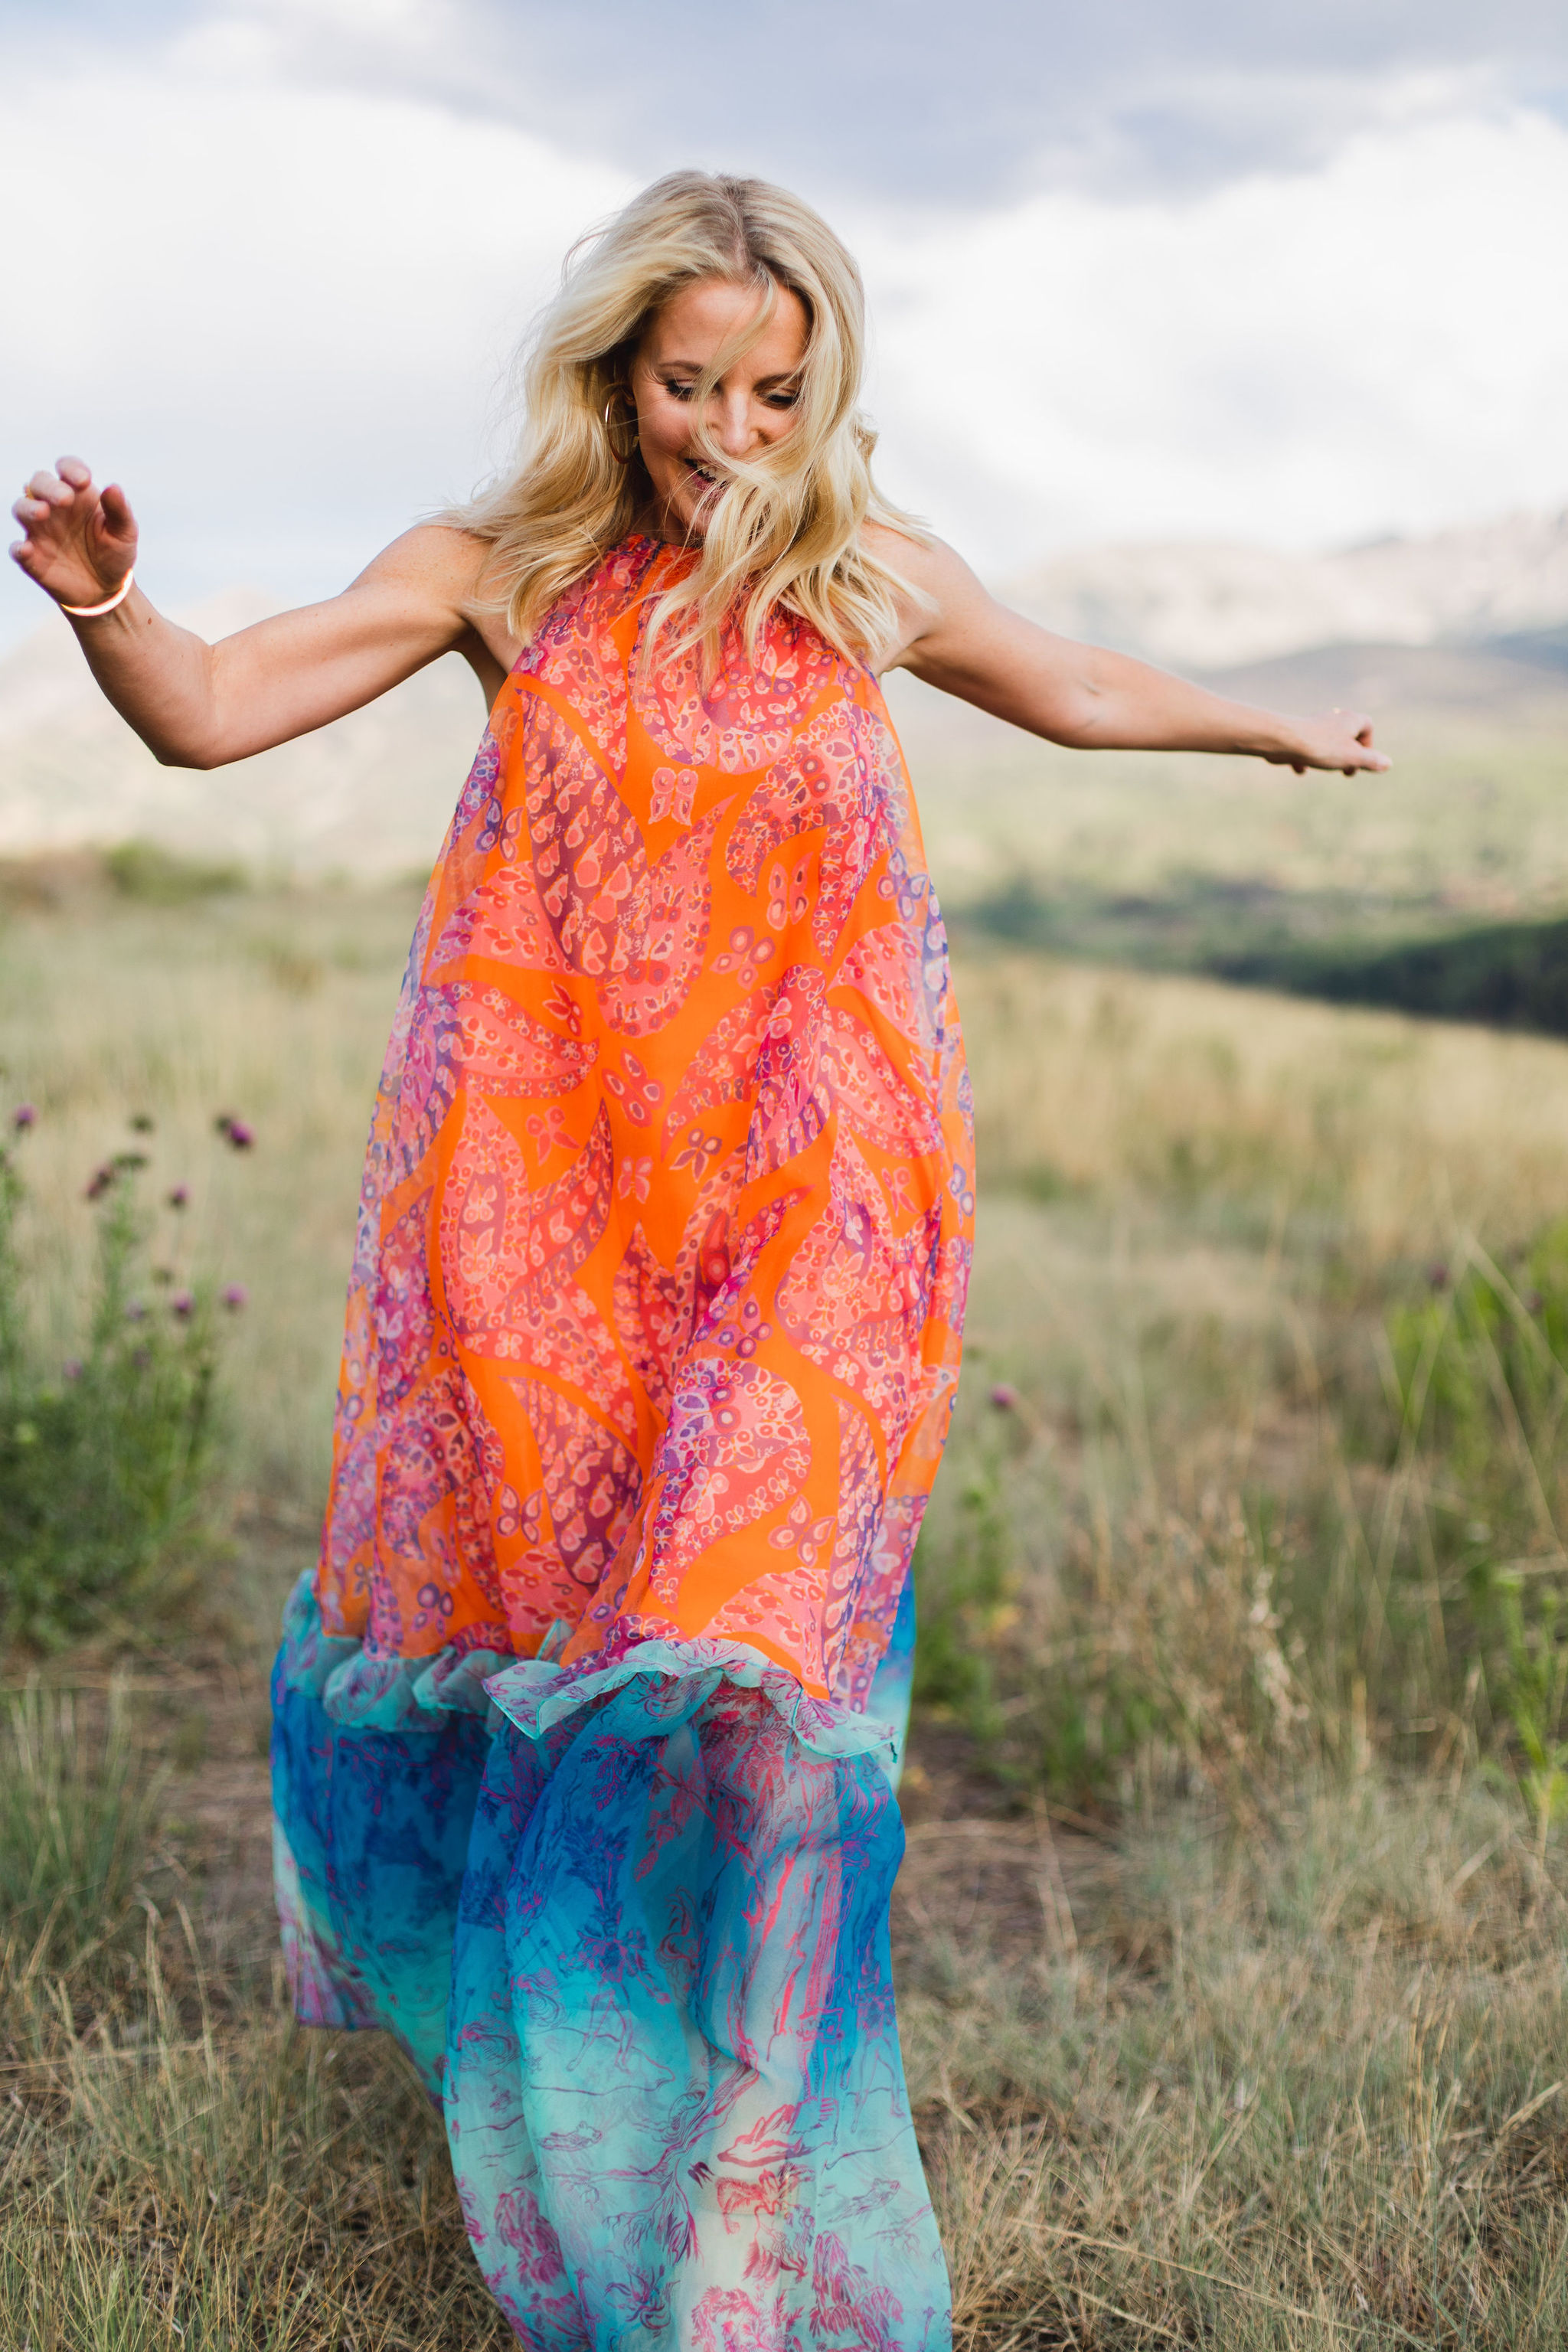 How To Manifest Anything, Fashion blogger Erin Busbee of Busbee Style wearing an orange and blue Staud Ina dress with white sunglasses walking around in Telluride, Colorado